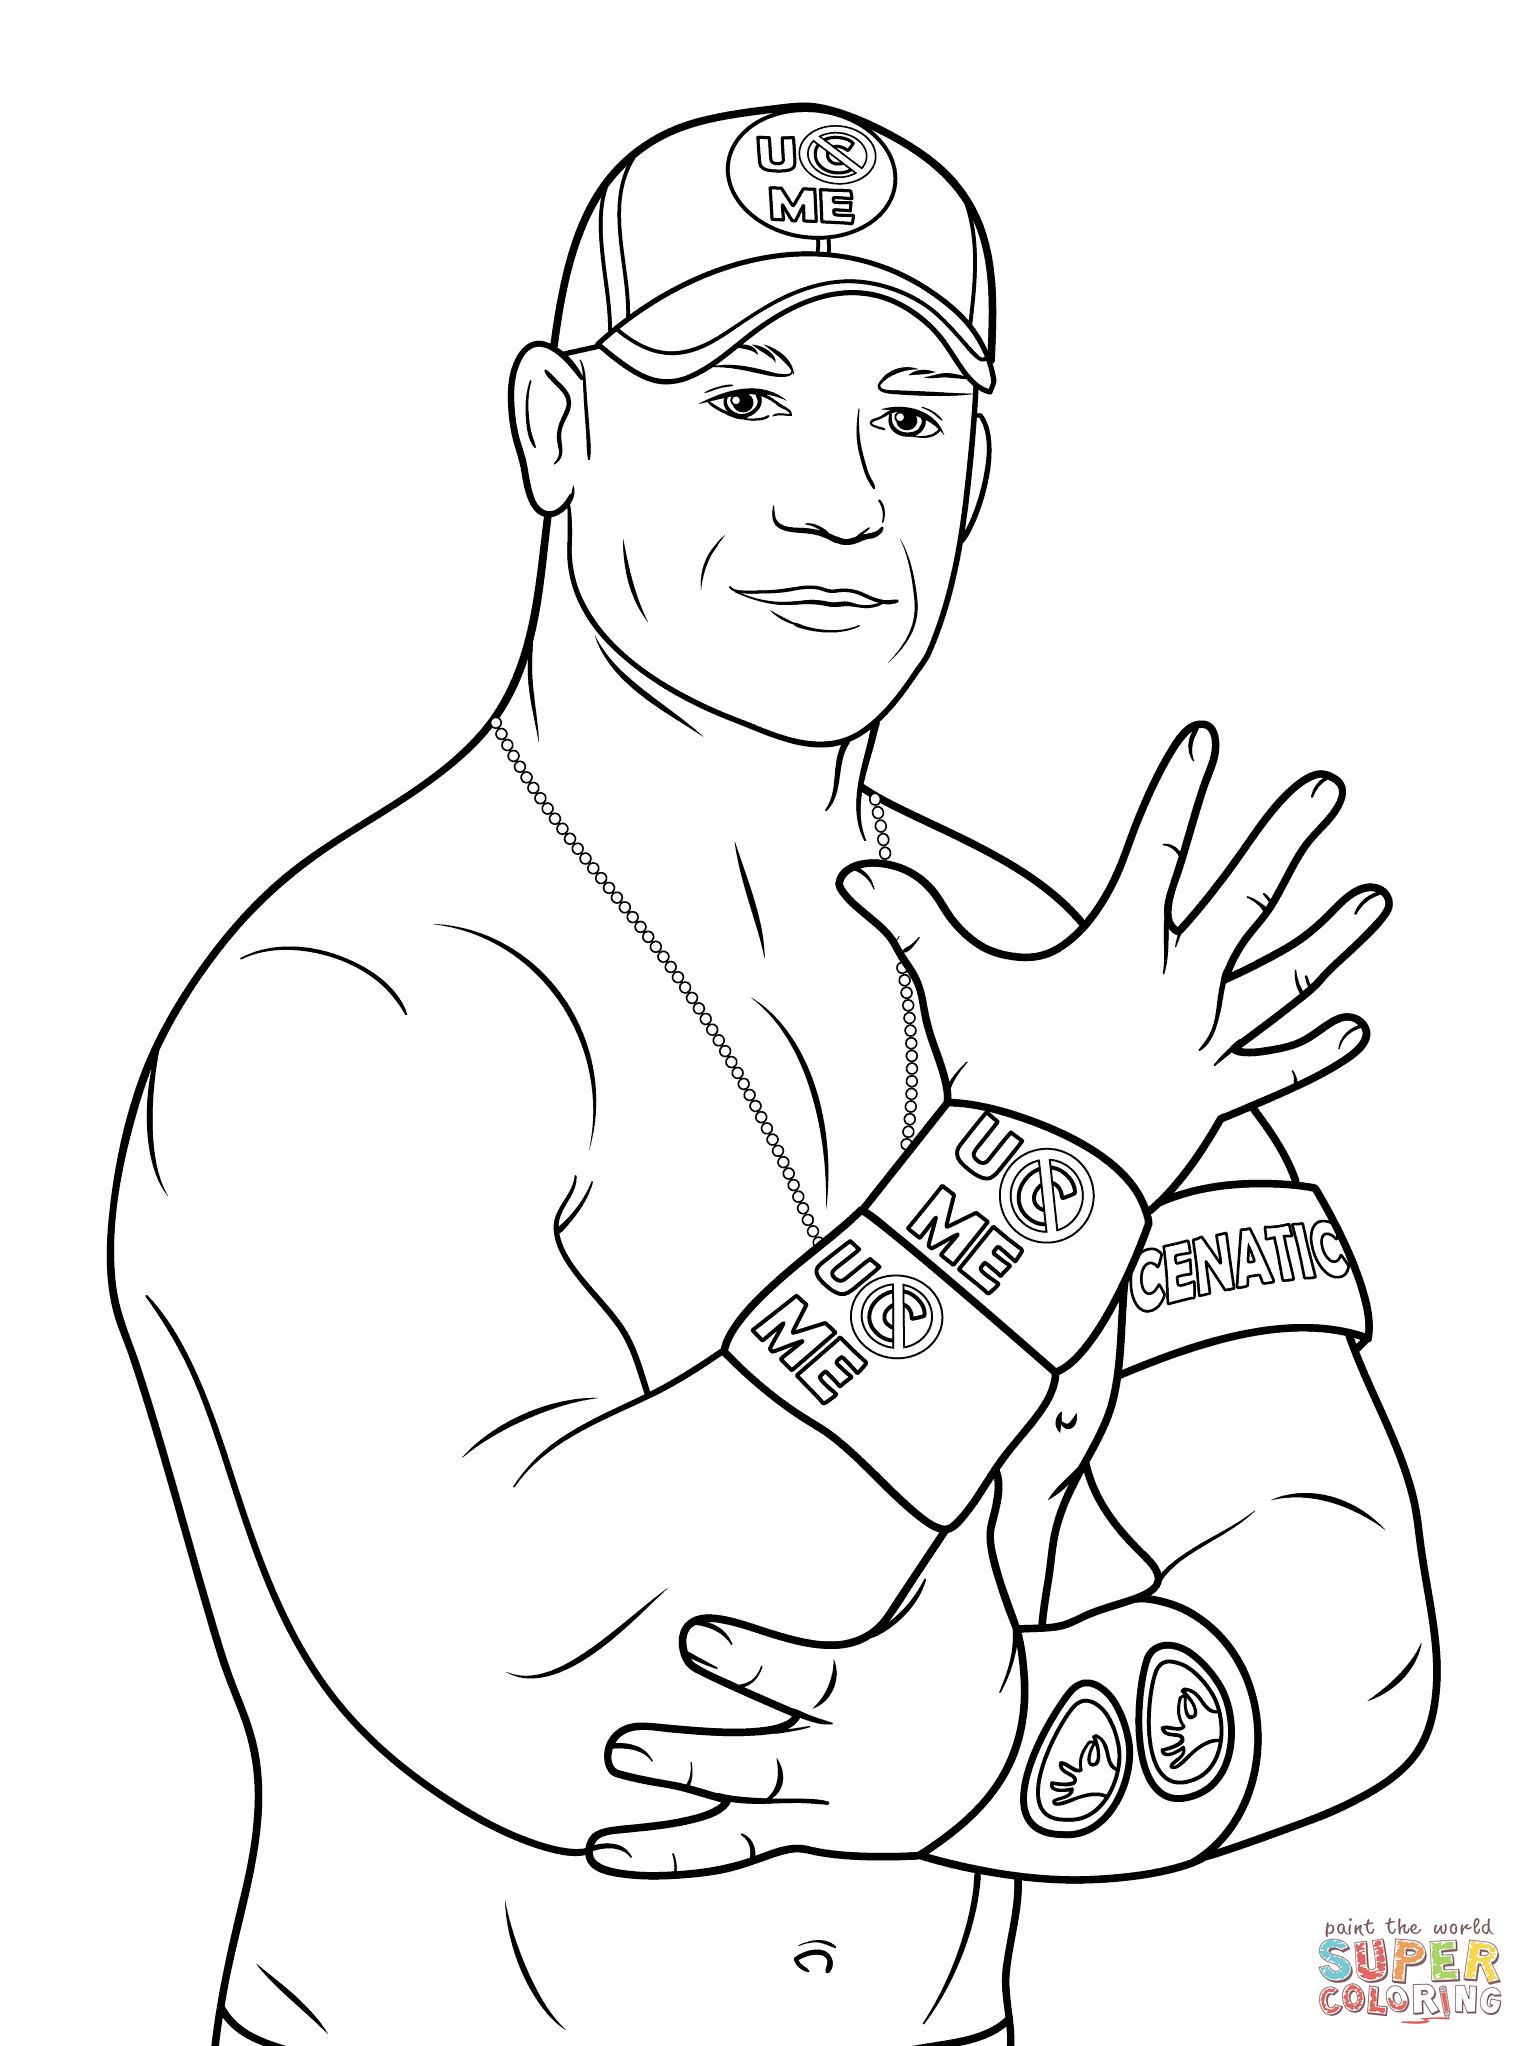 WWE coloring pages | Free Coloring Pages